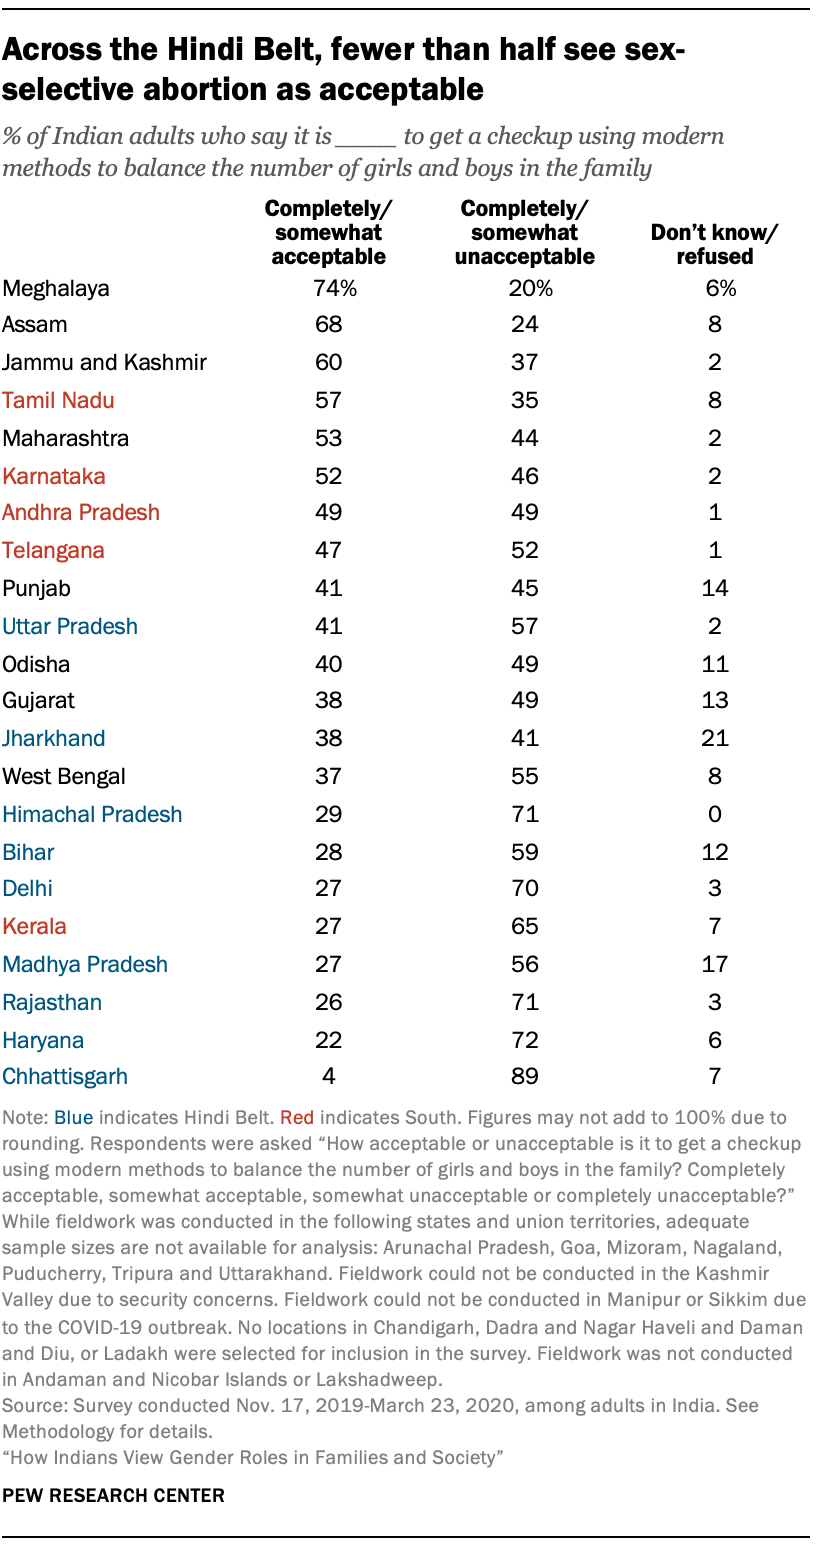 Across the Hindi Belt, fewer than half see sex-selective abortion as acceptable